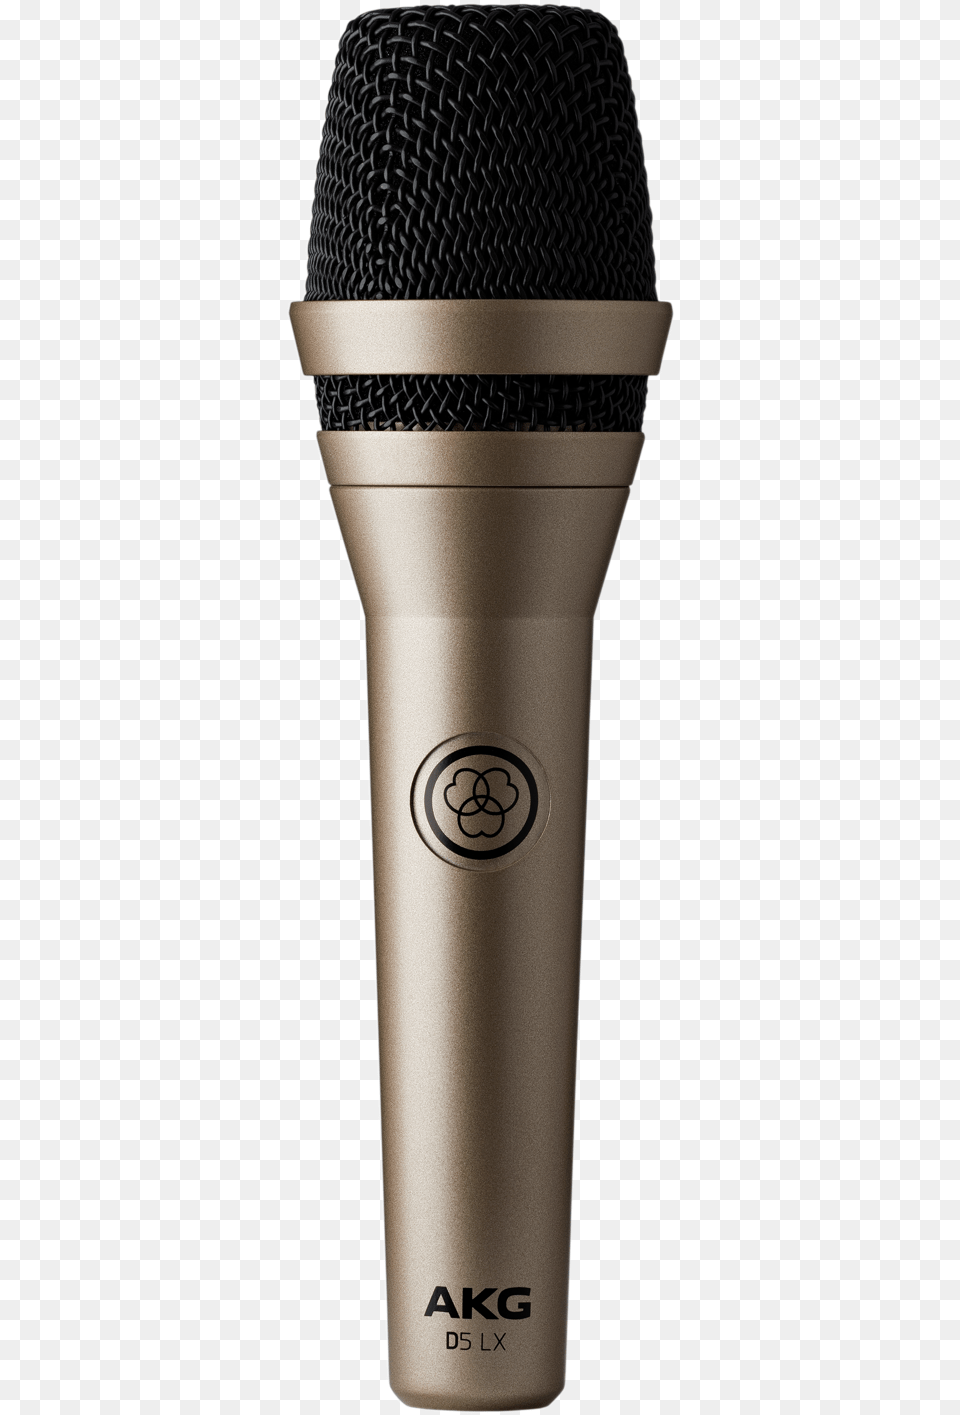 Gold Mic, Electrical Device, Microphone, Bottle, Shaker Png